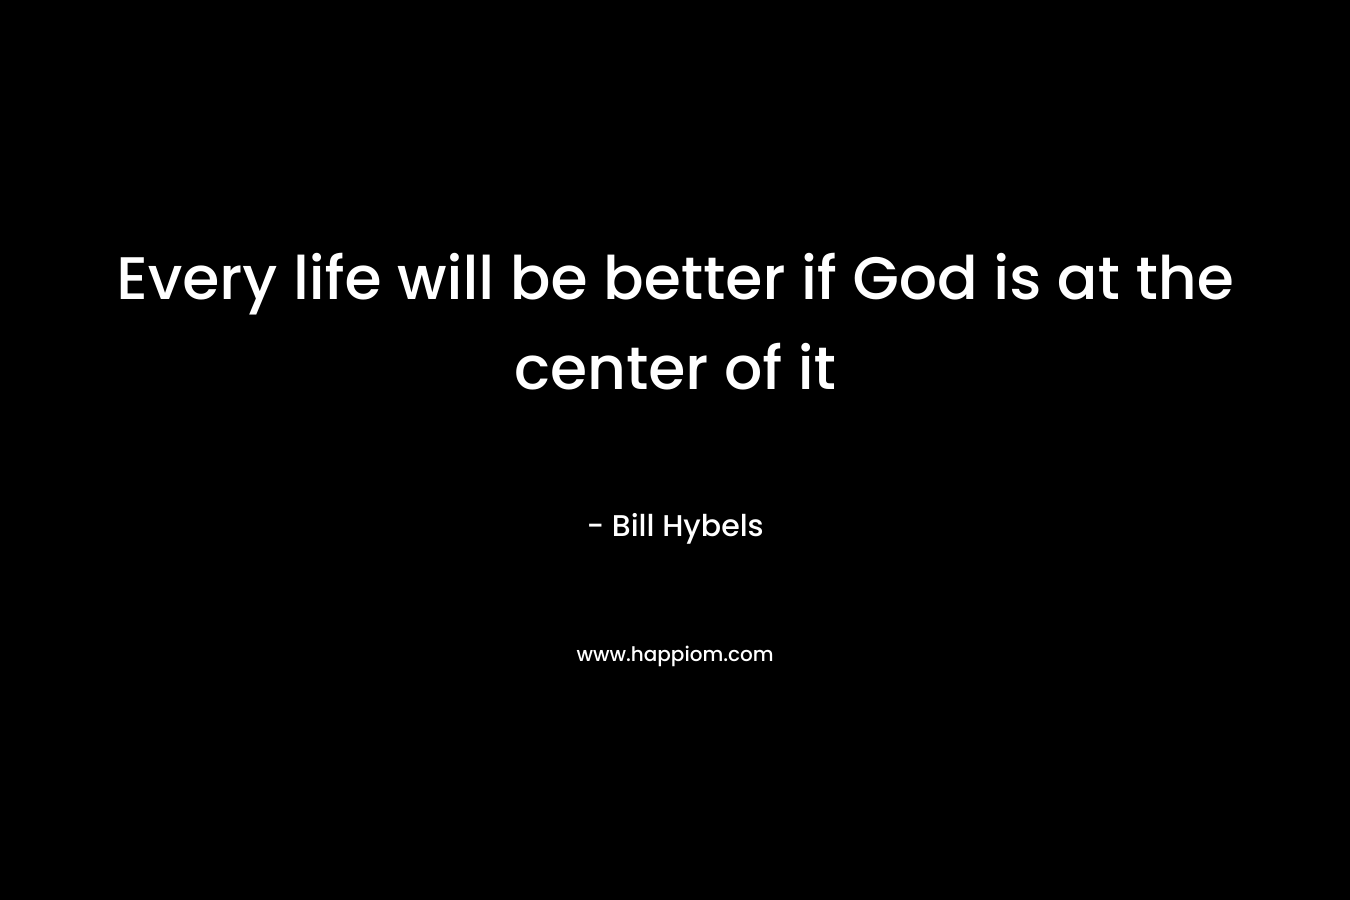 Every life will be better if God is at the center of it